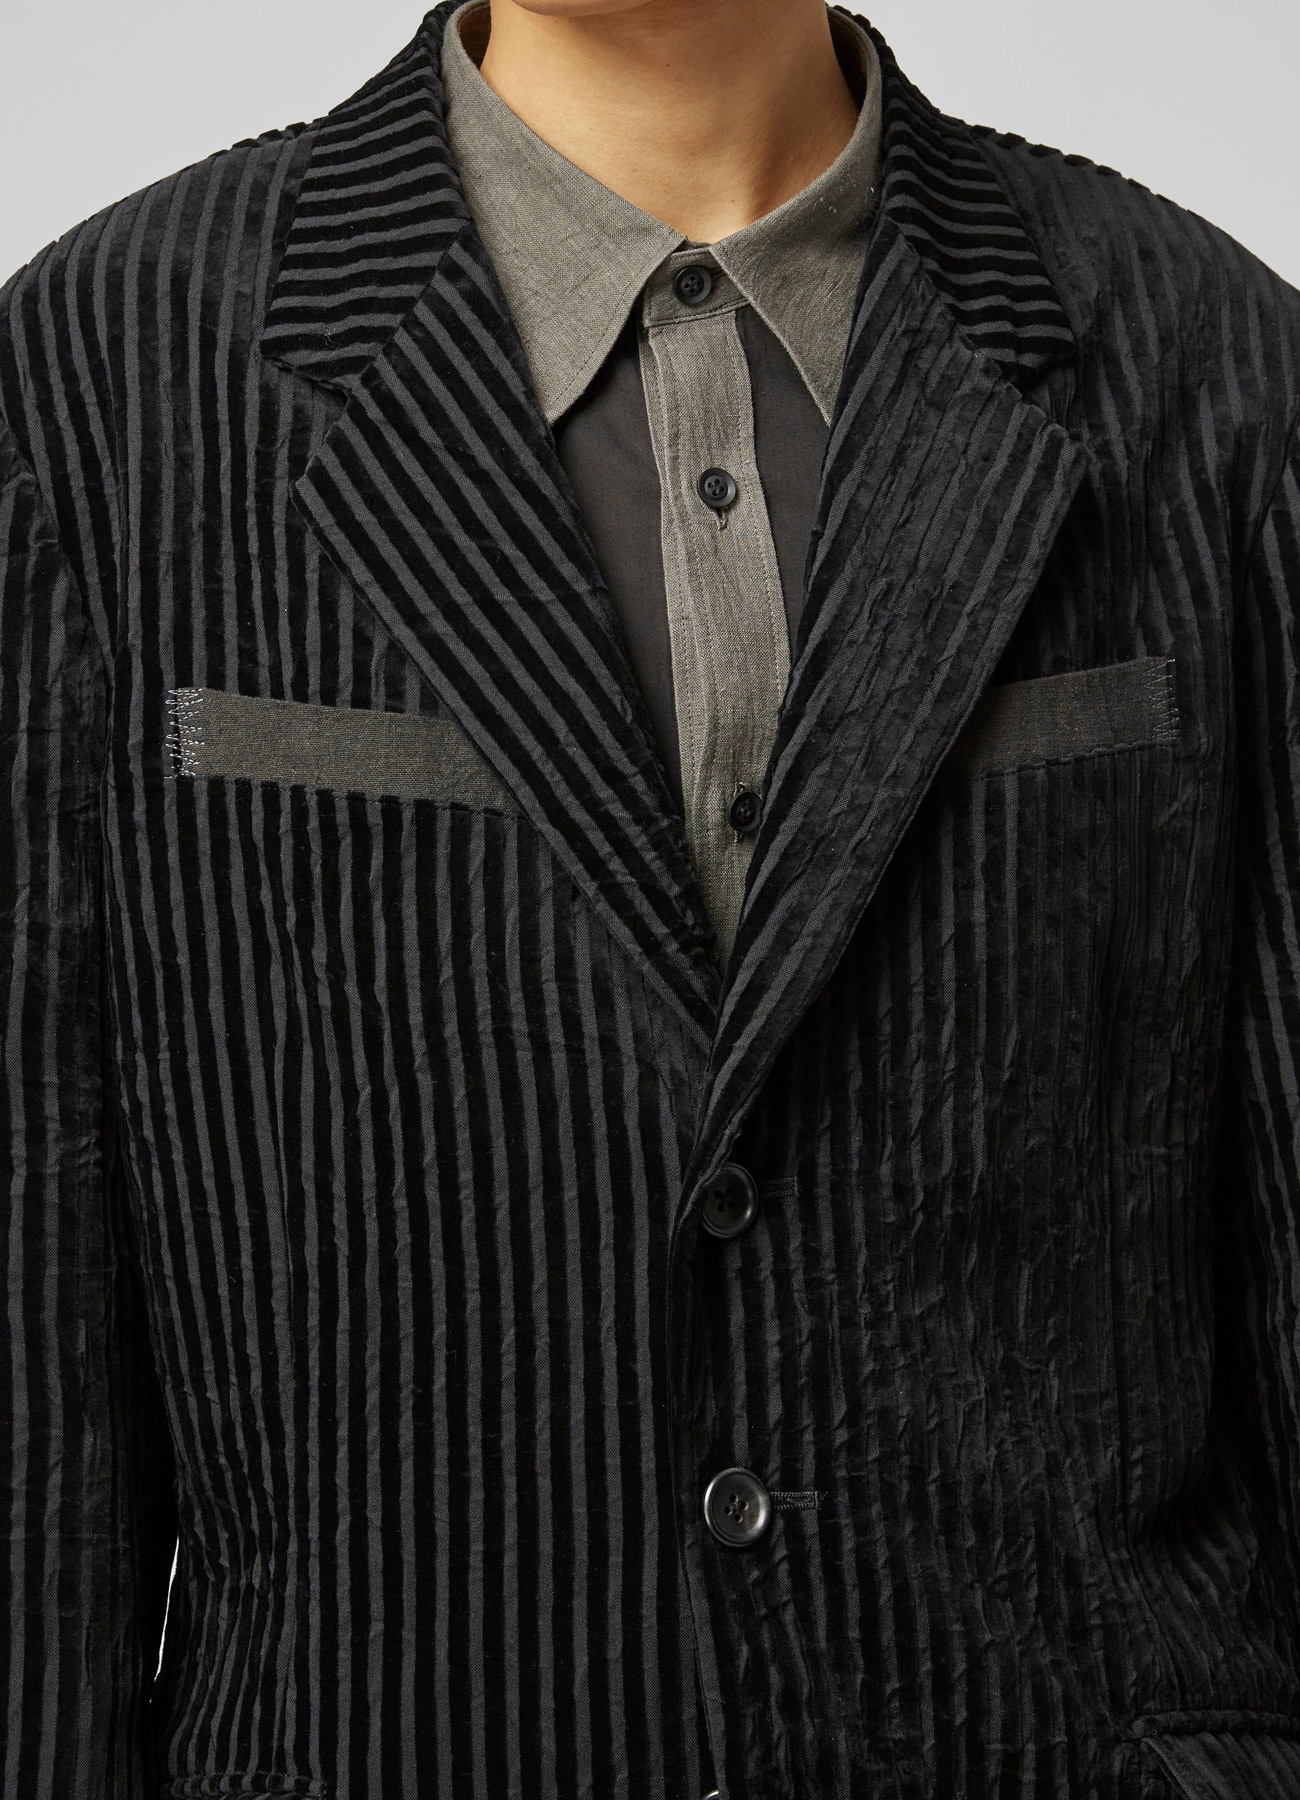 WRINKLED STRIPED 3-BUTTON JACKET WITH PEAK LAPELS(S GREY): Y's for